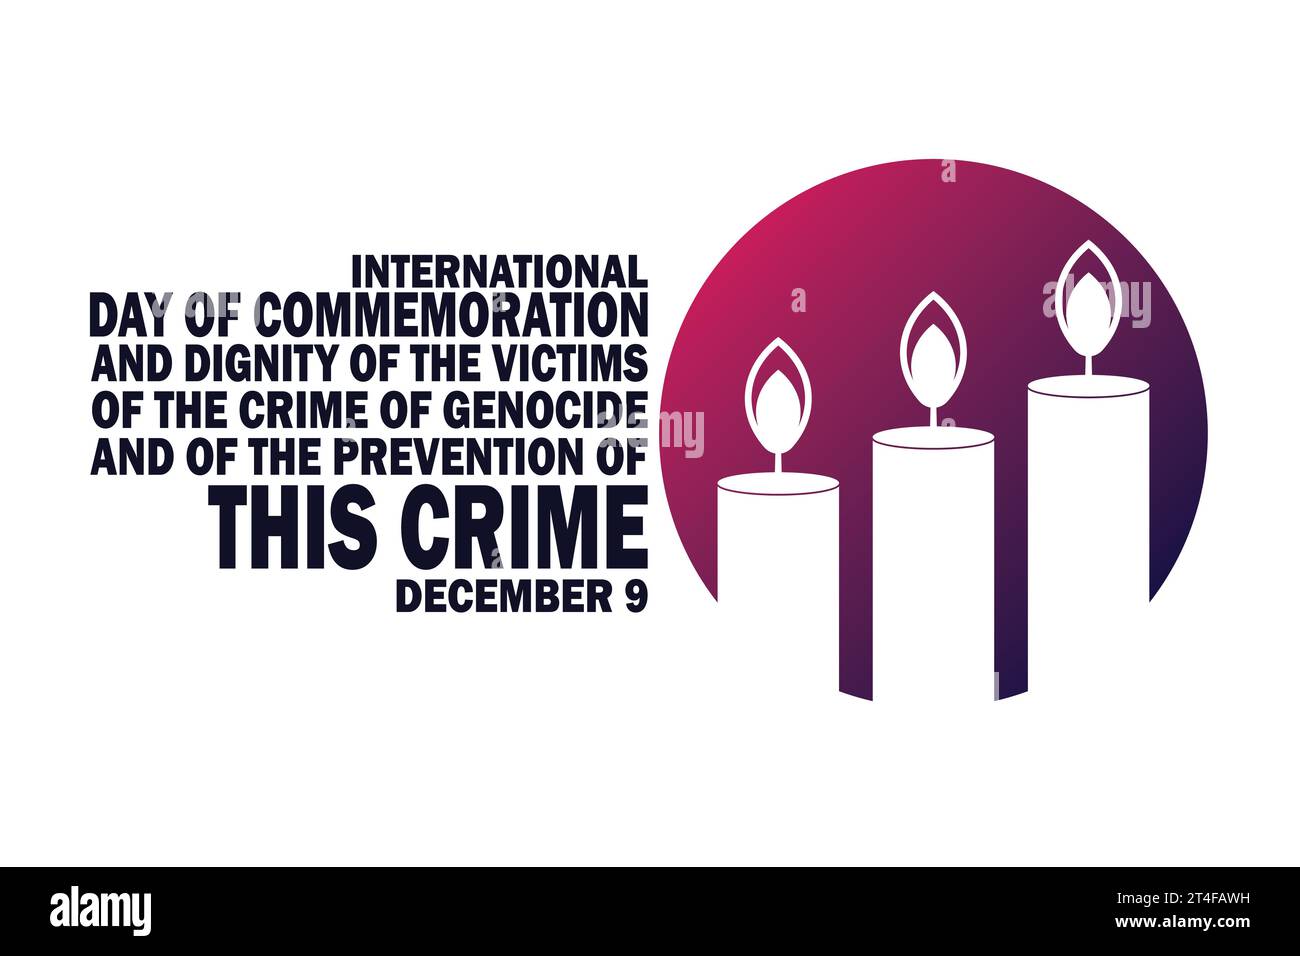 International Day of Commemoration And Dignity of the Victims of the crime of Genocide and of the prevention of this crime. December 09. Stock Vector